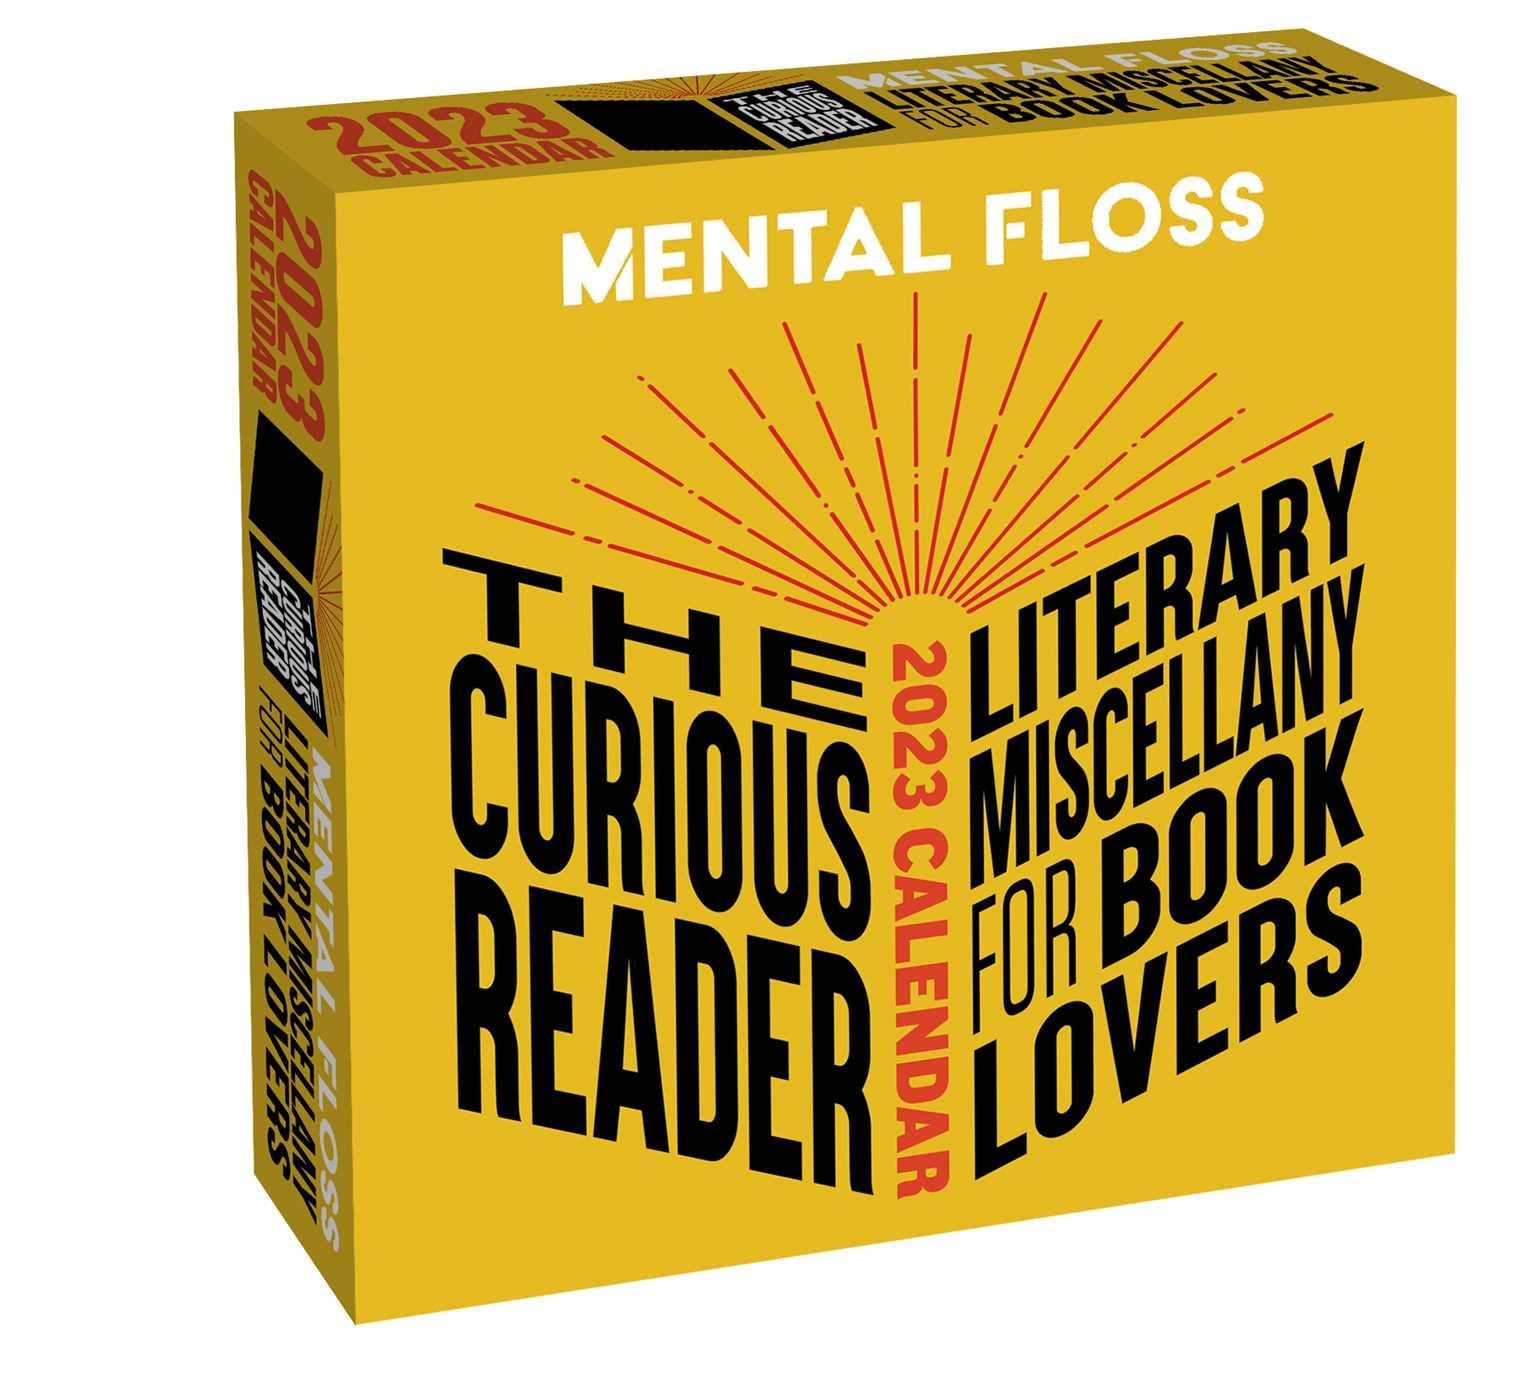 Image of the mental floss literary miscellany calendar for 2022.